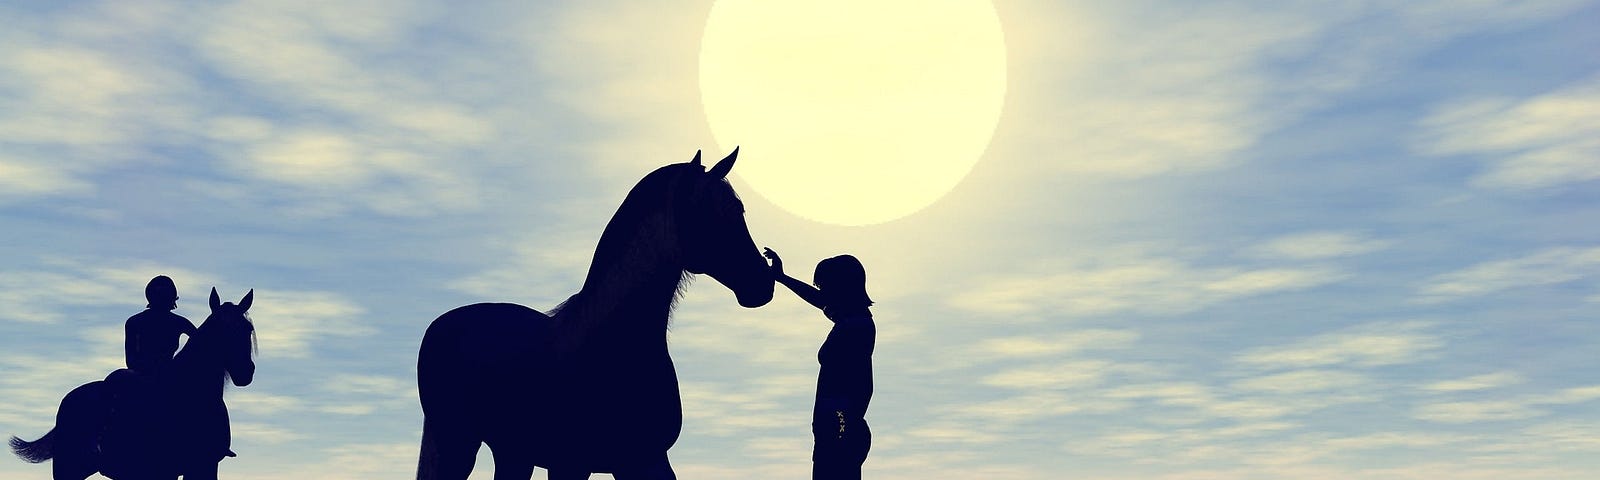 2 horses silhouetted against a bright blue sky just before sunset. One horse has a rider and the other has a person standing in front touching its nose.